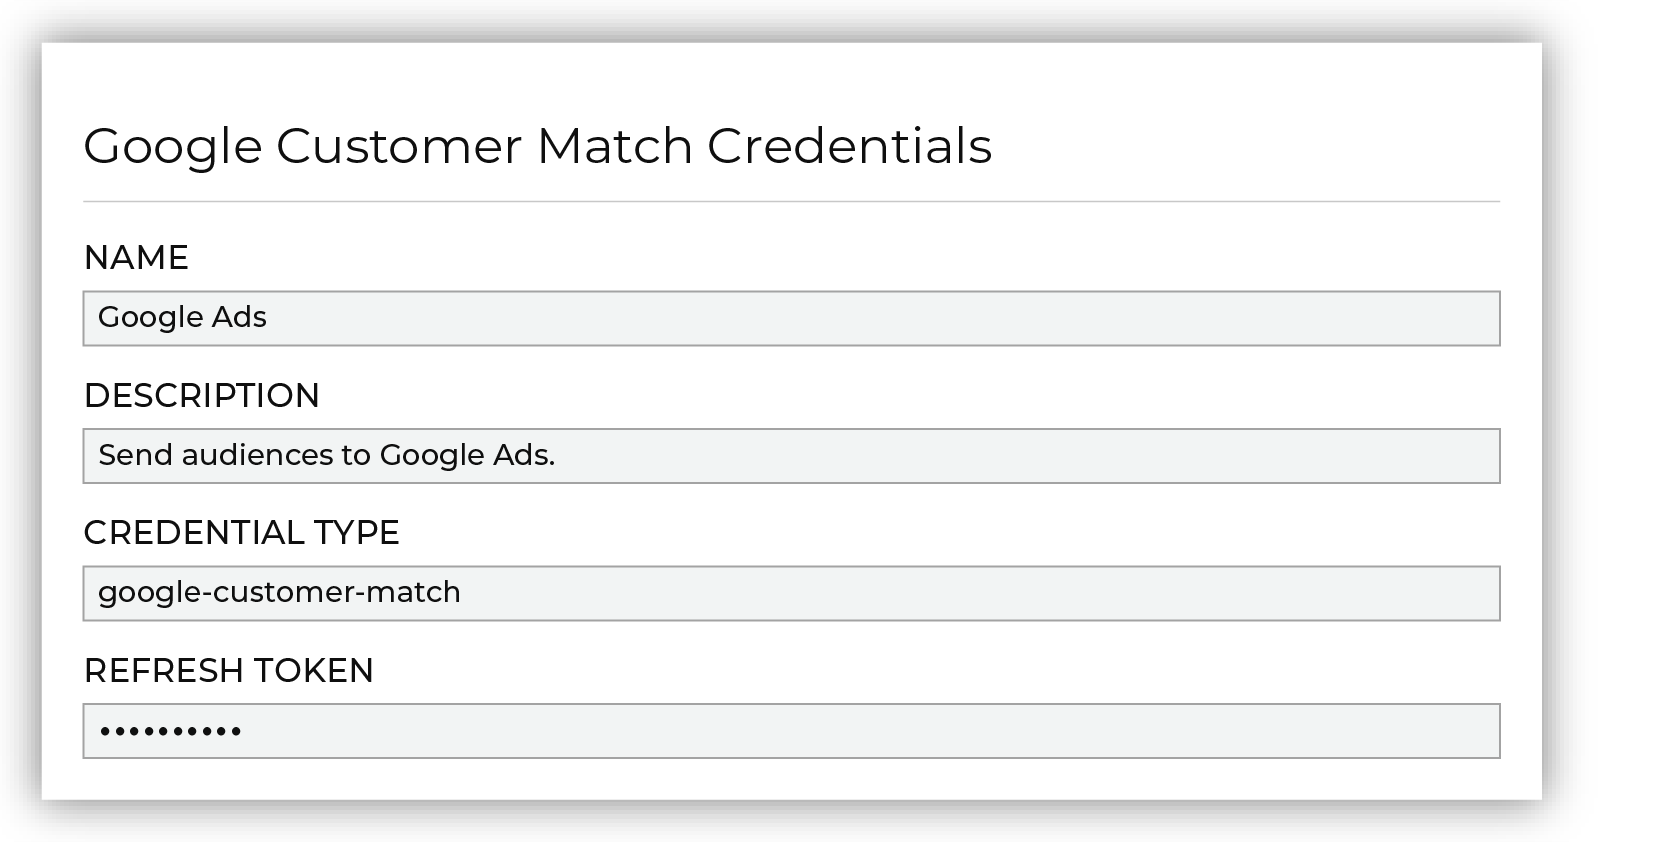 Set the following credentials for Google Ads.